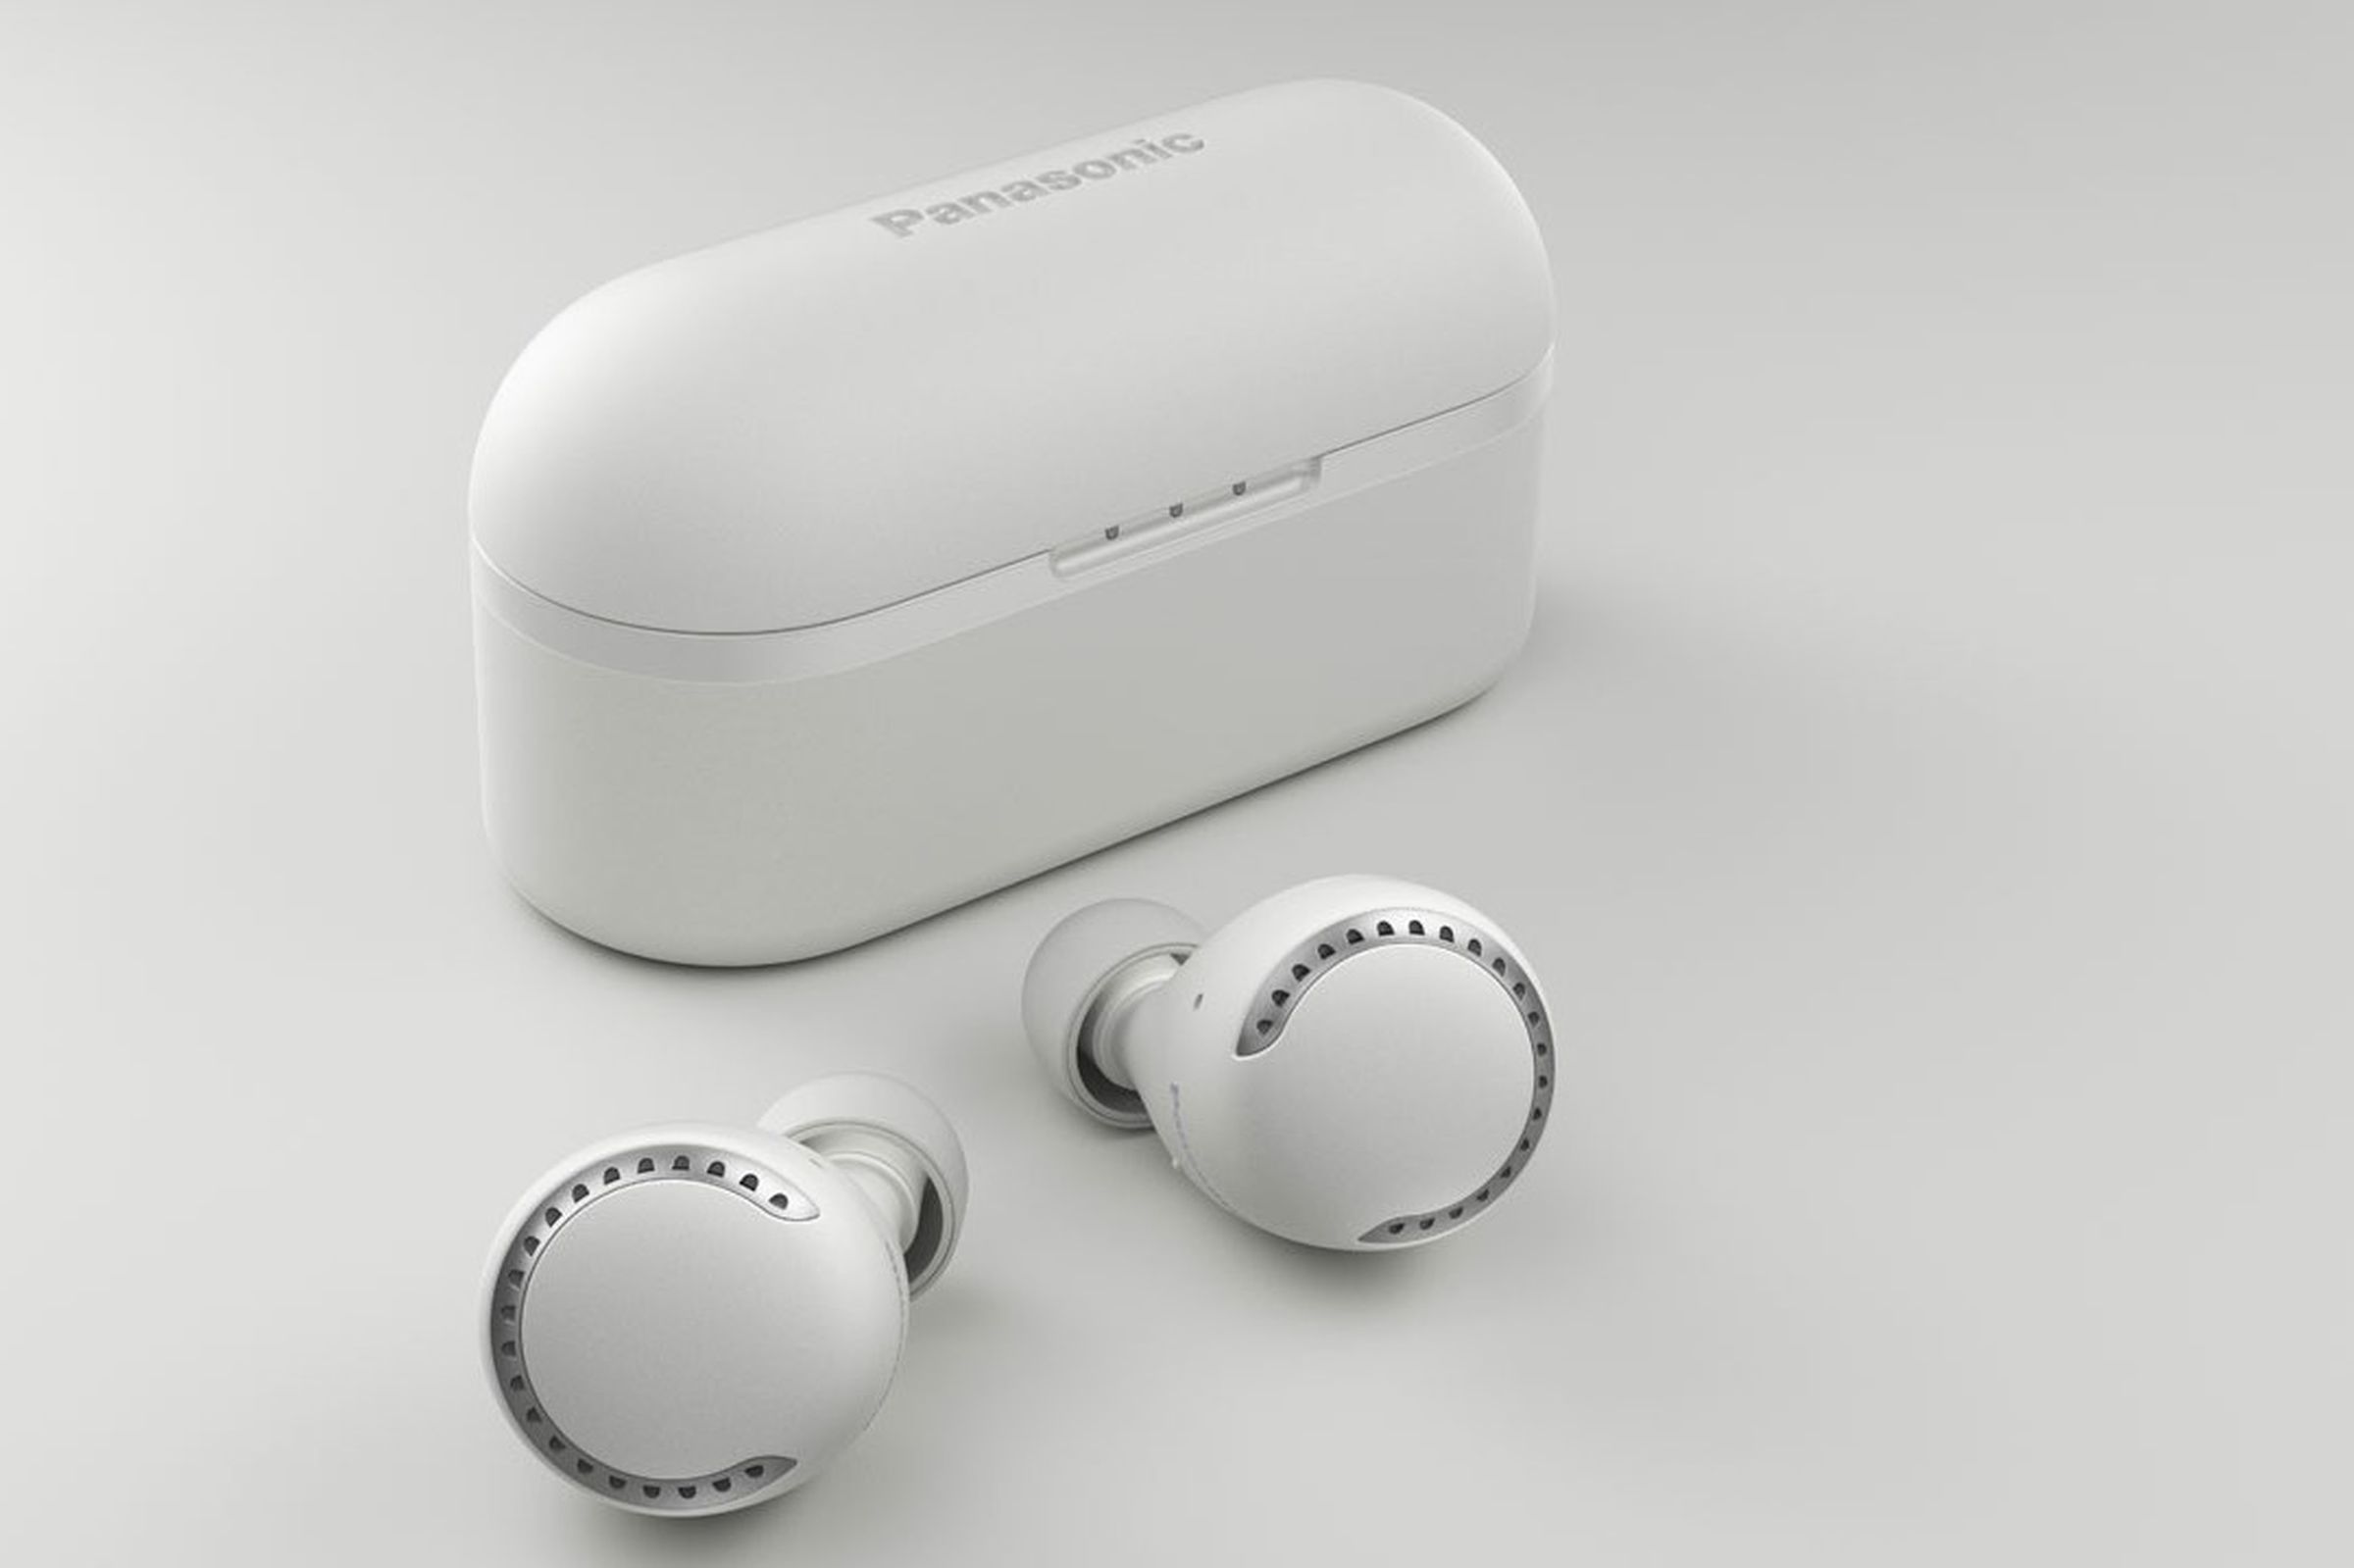 Panasonic’s true wireless ANC earbuds come with IPX4 water resistance.